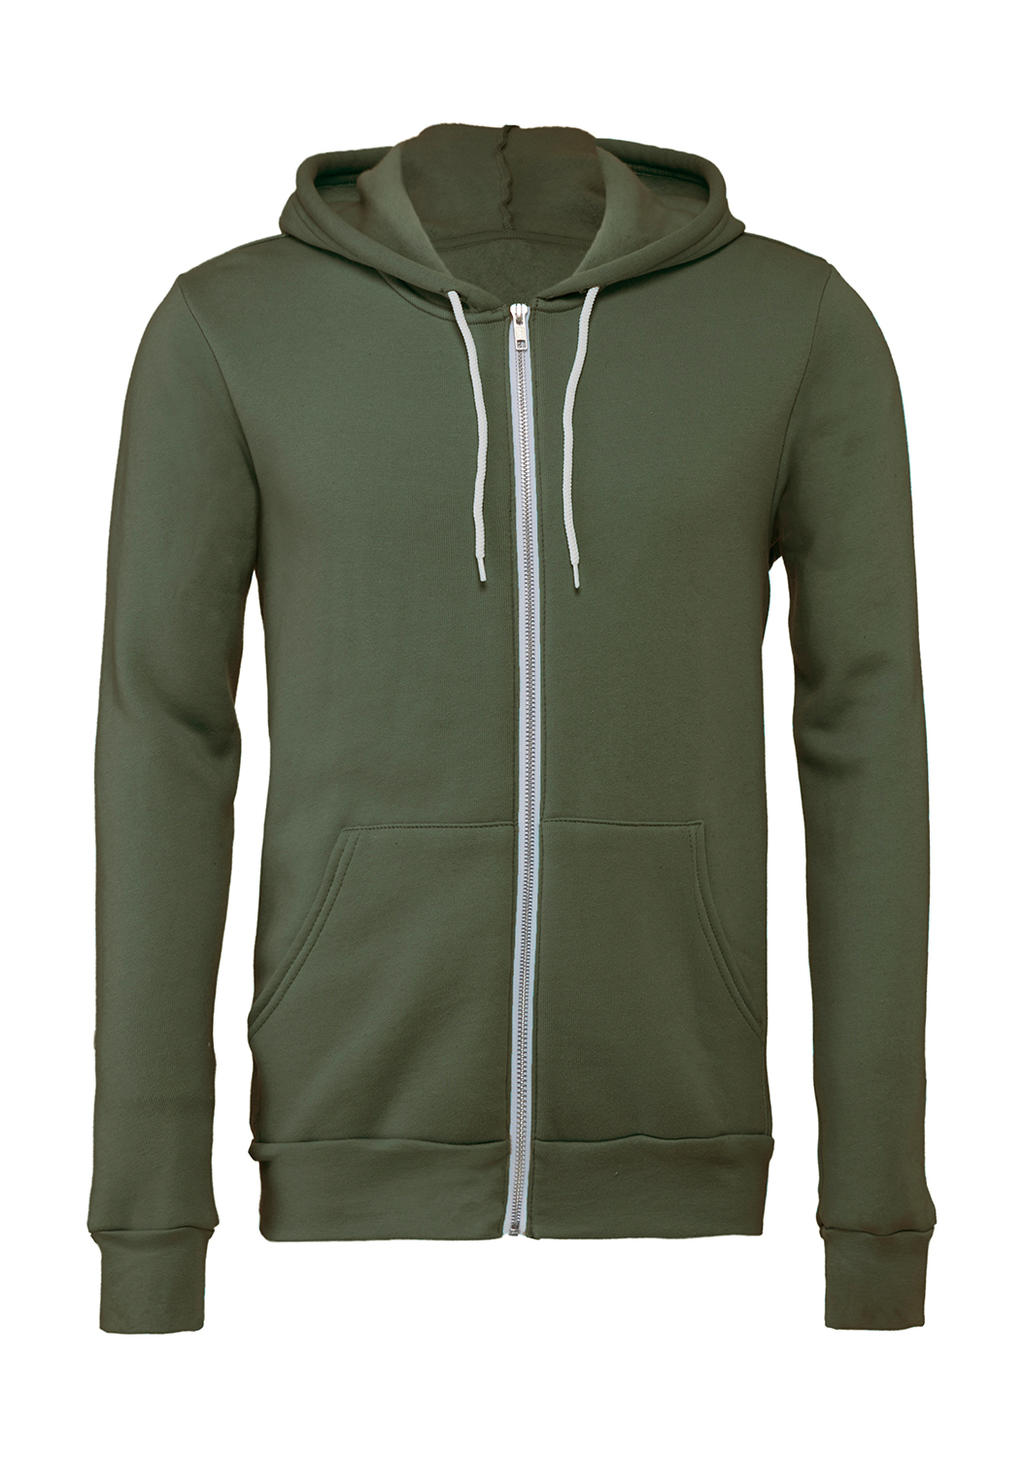  Unisex Poly-Cotton Full Zip Hoodie in Farbe Military Green